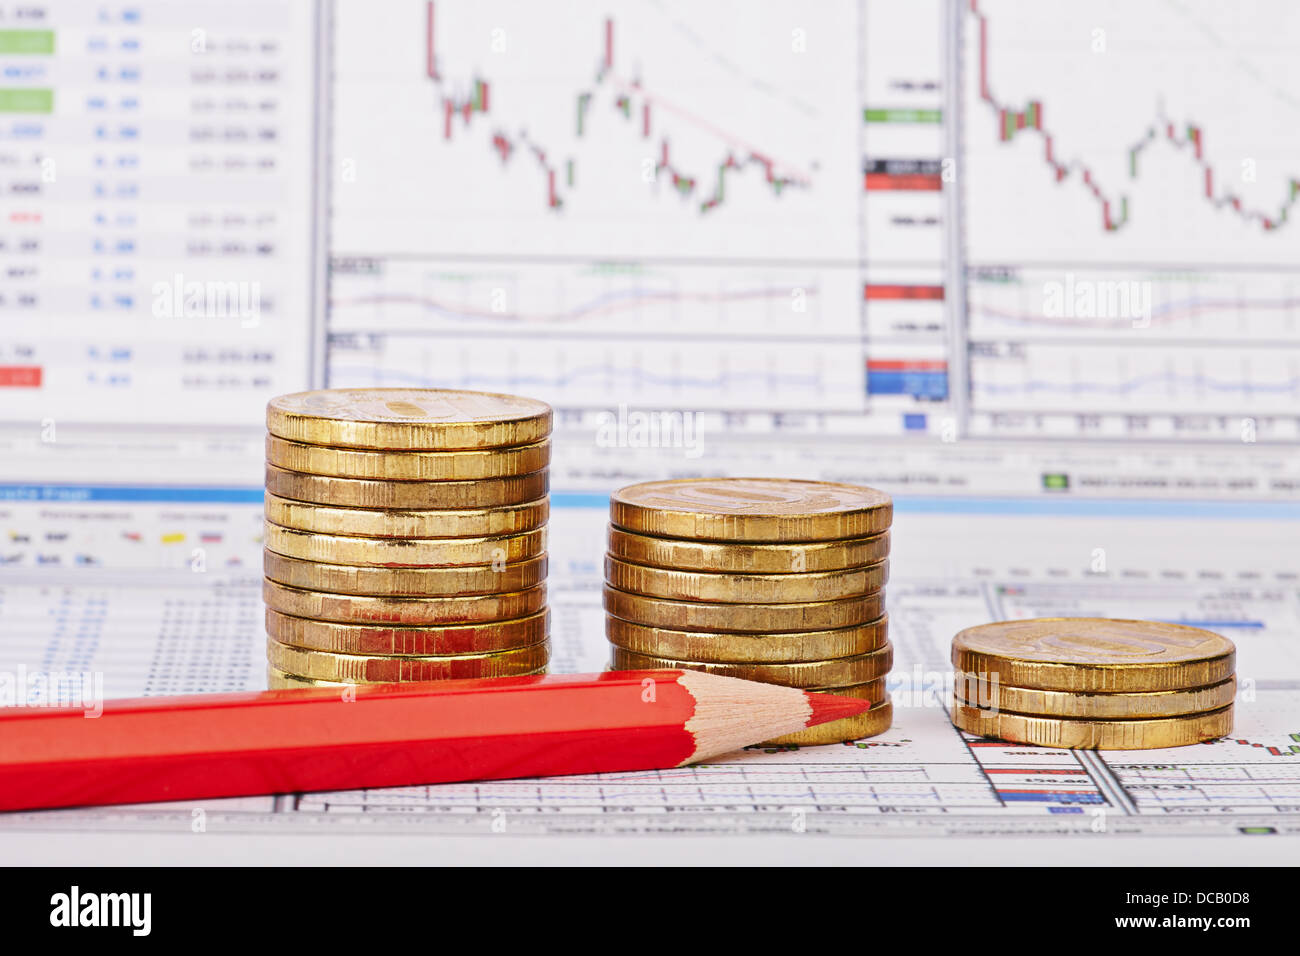 Downtrend coins stacks, red pencil, financial chart as background, red pencil. Selective focus Stock Photo